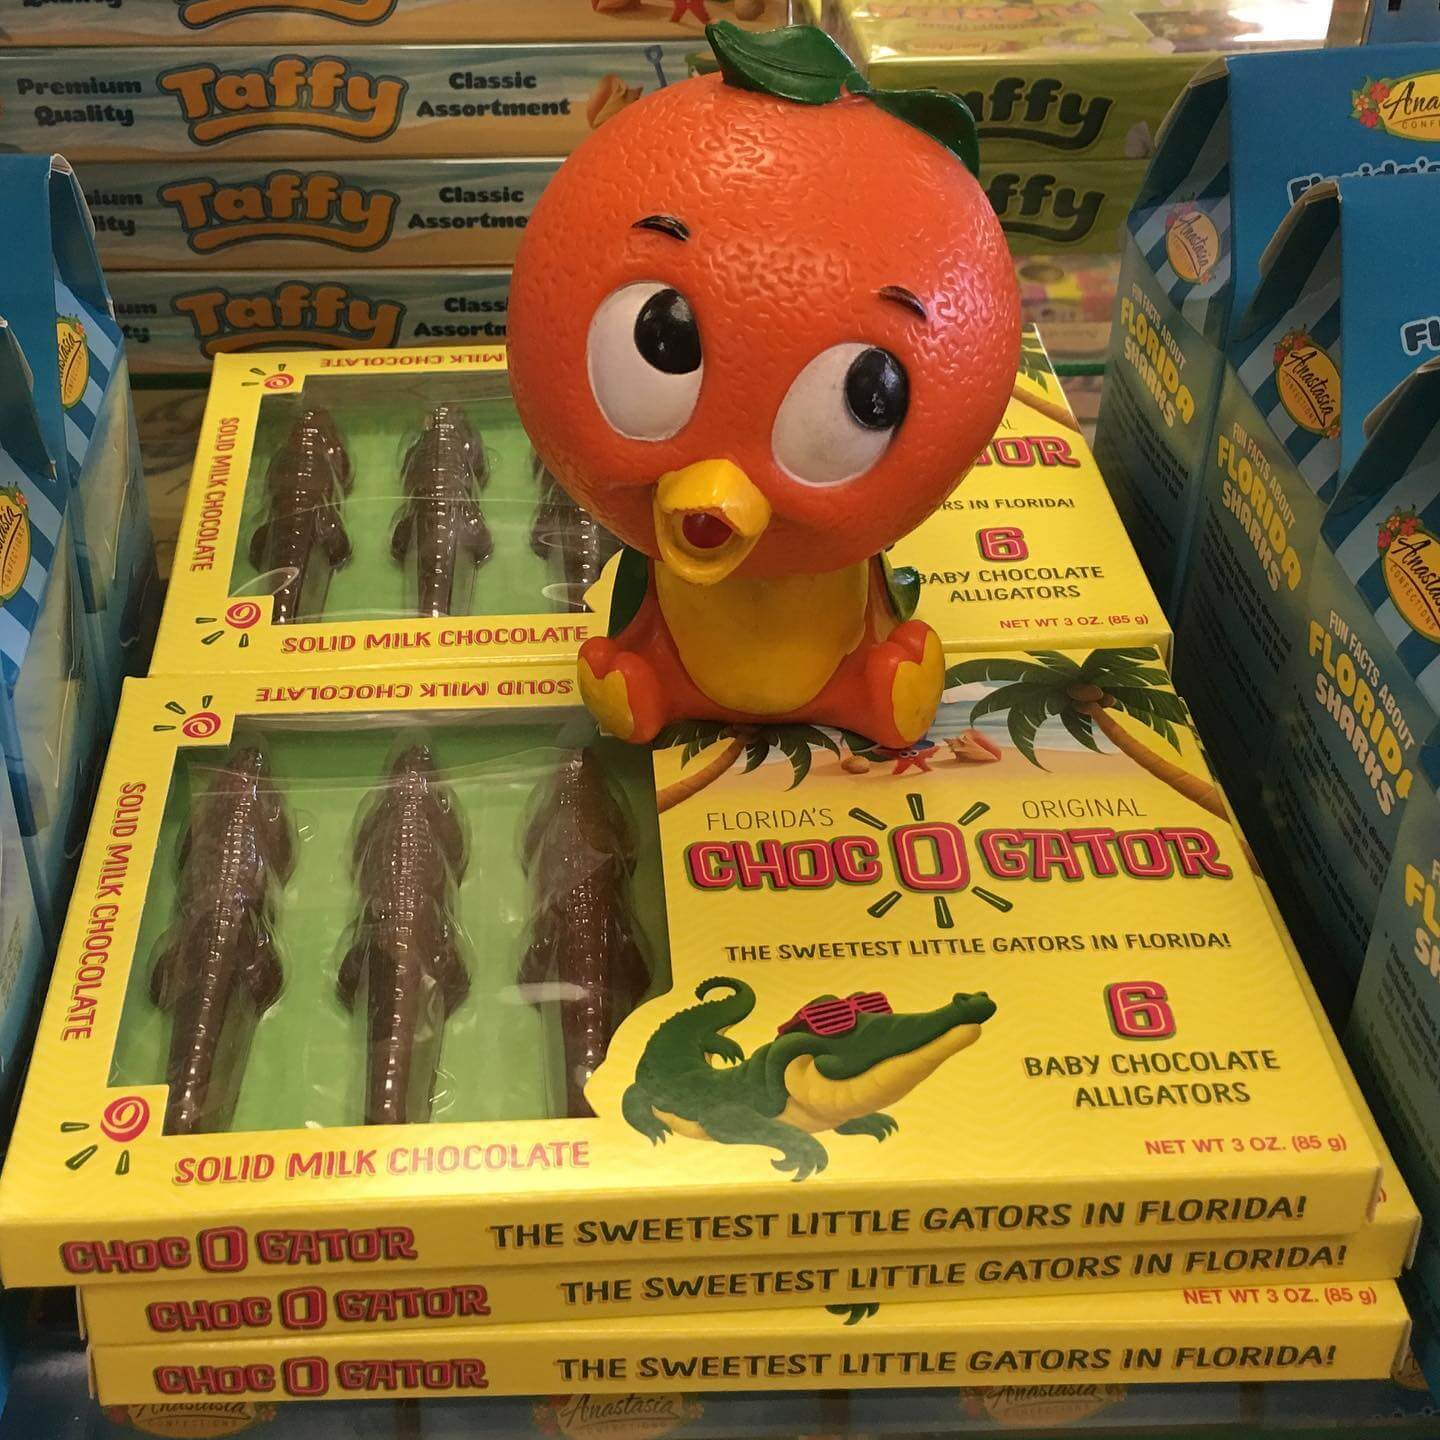 Orange bird is one of the famous Florida mascots 